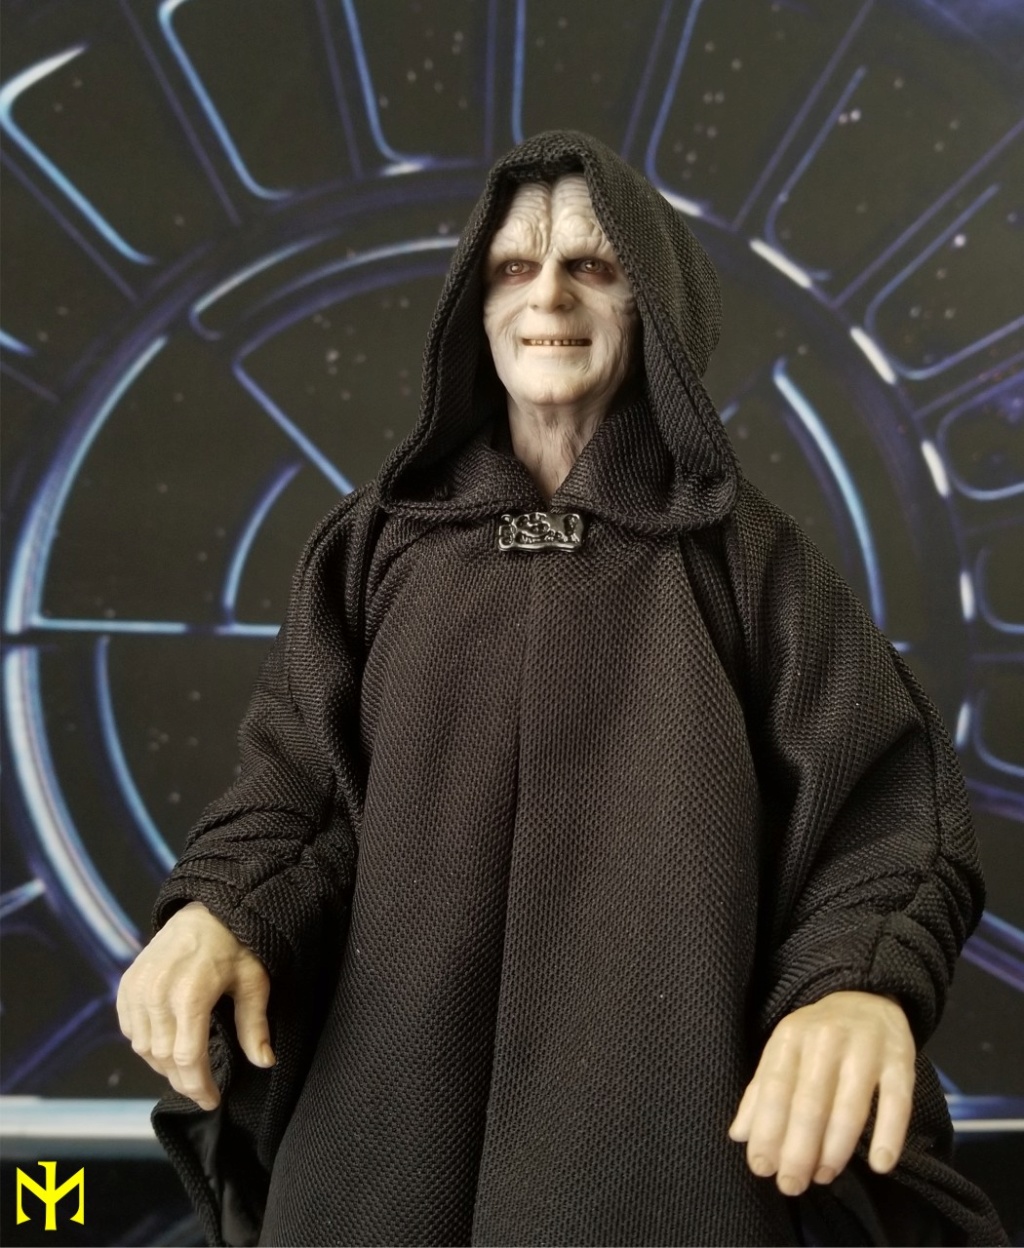 starwars - Hot Toys Star Wars Emperor Palpatine (Deluxe) Review Htep1710